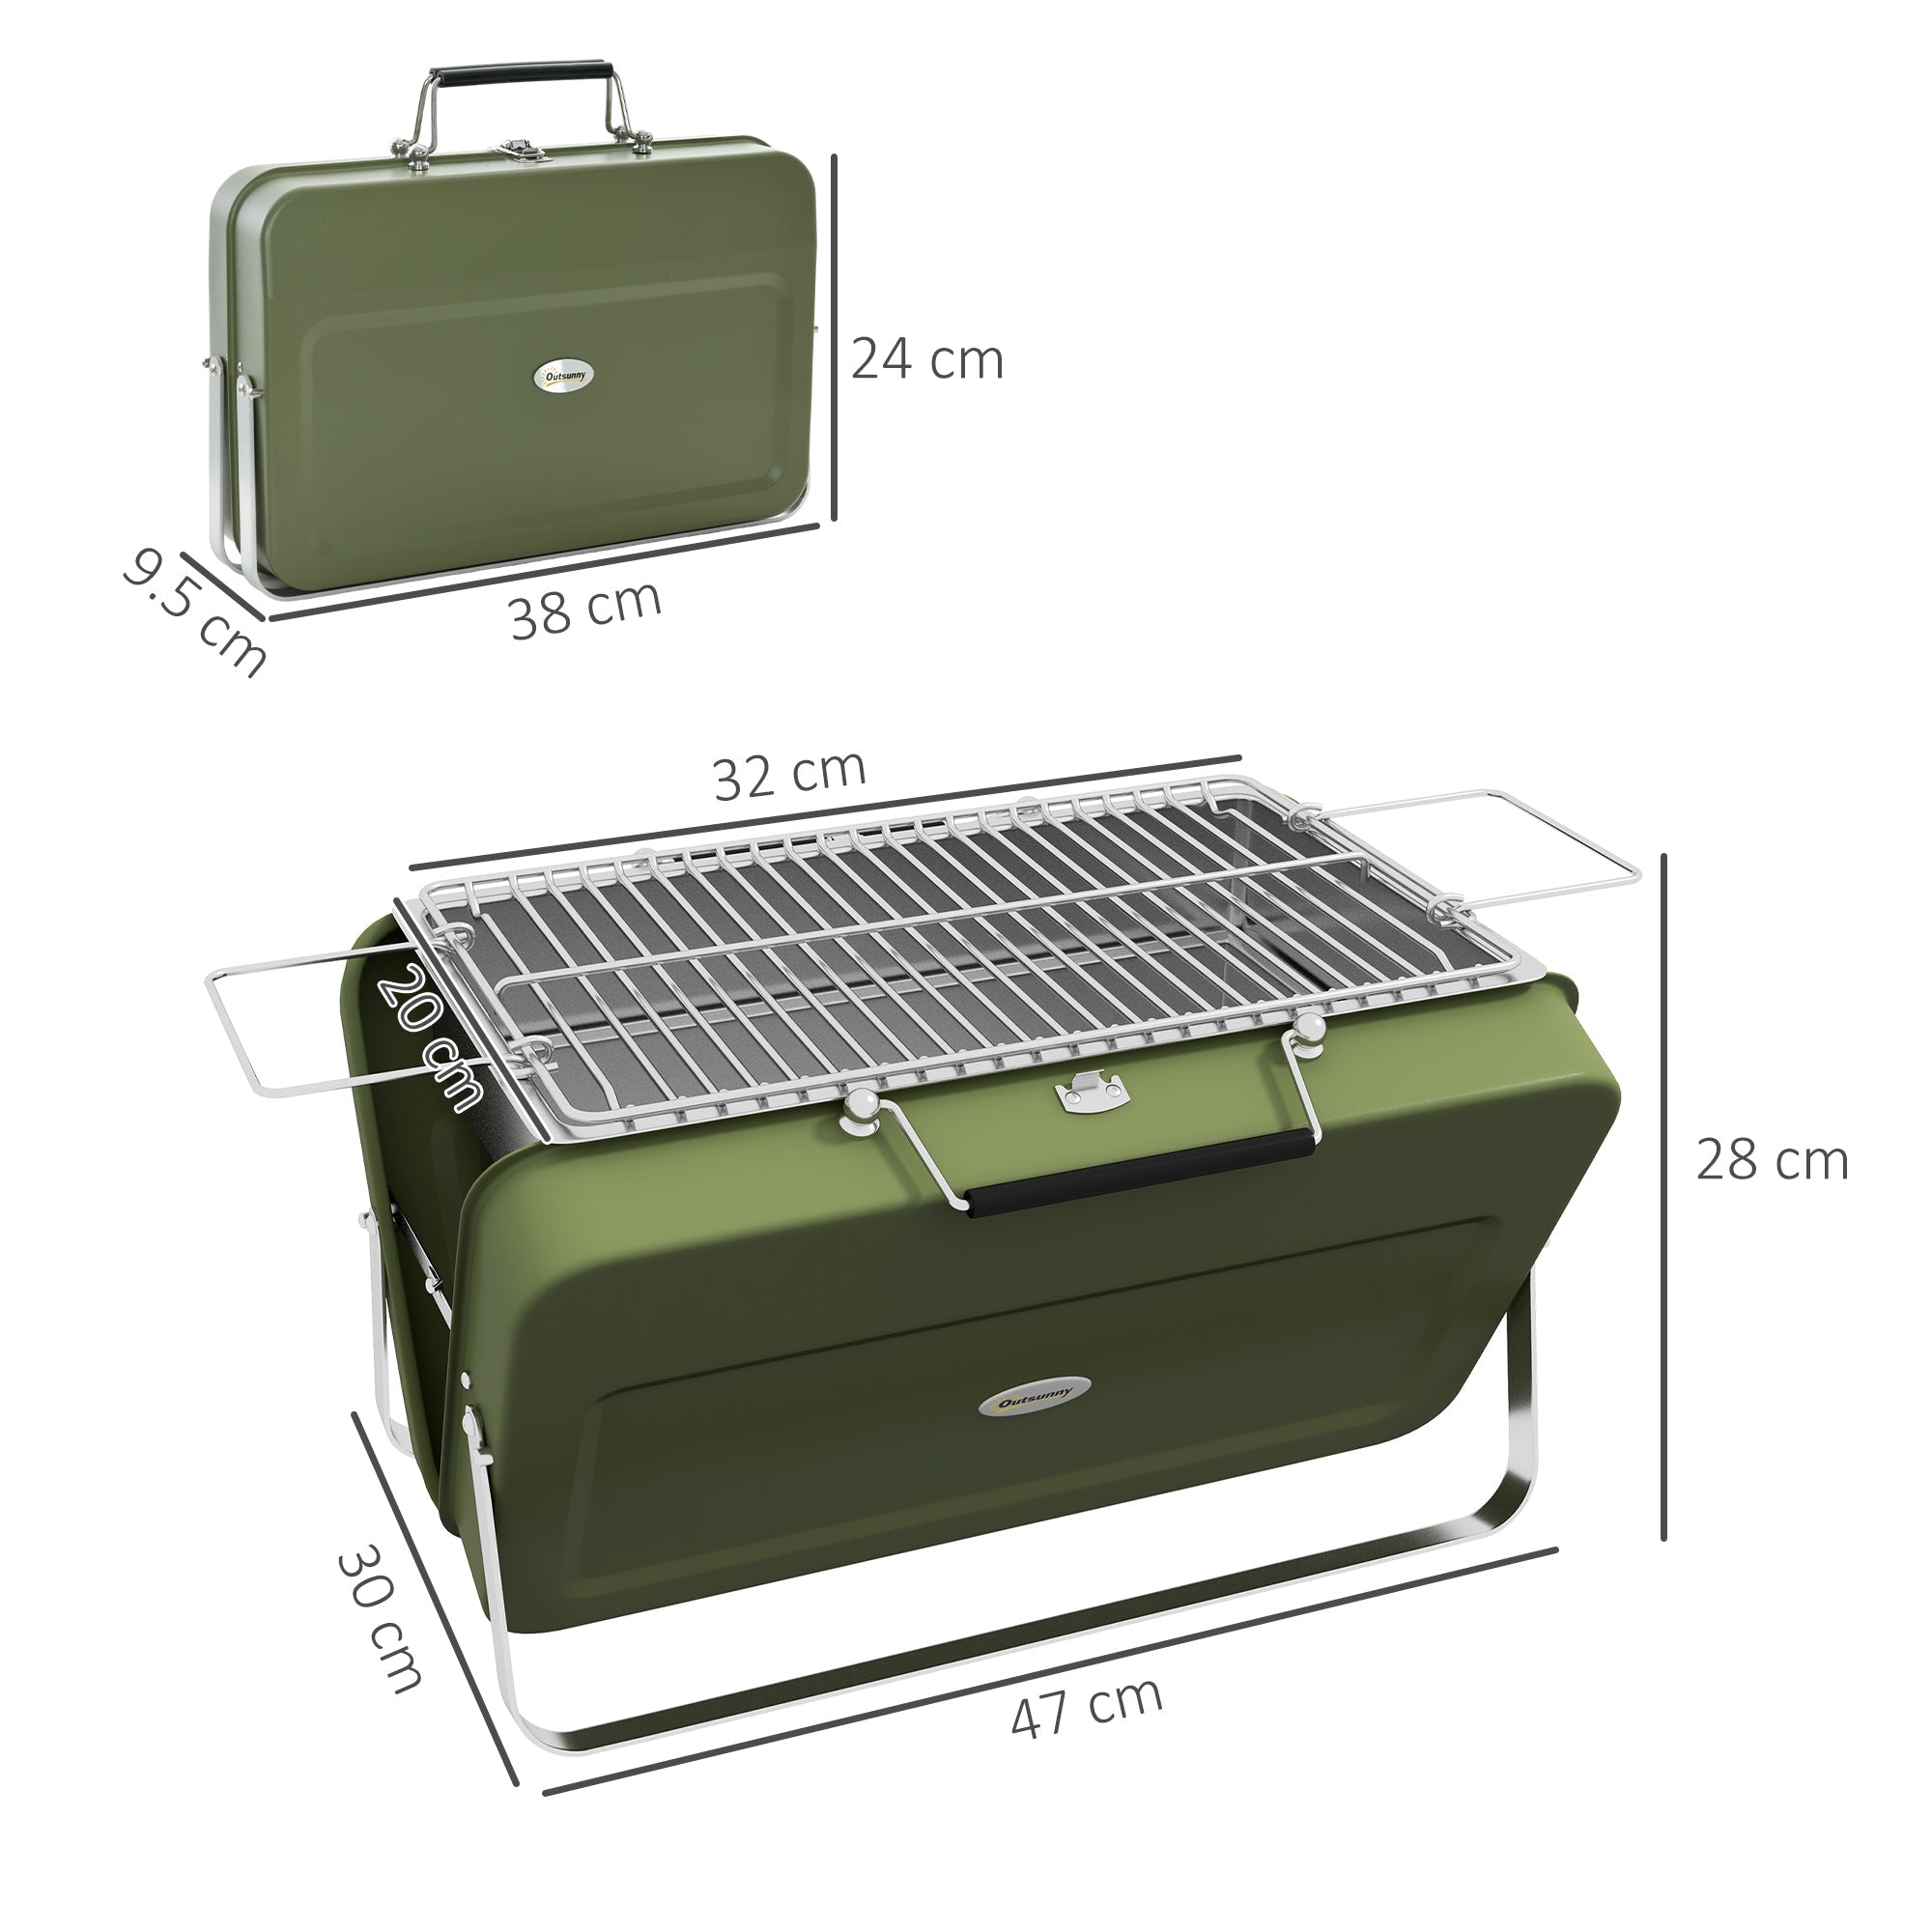 Foldable Suitcase Design Mini Charcoal Barbecue Grill BBQ, Green-2